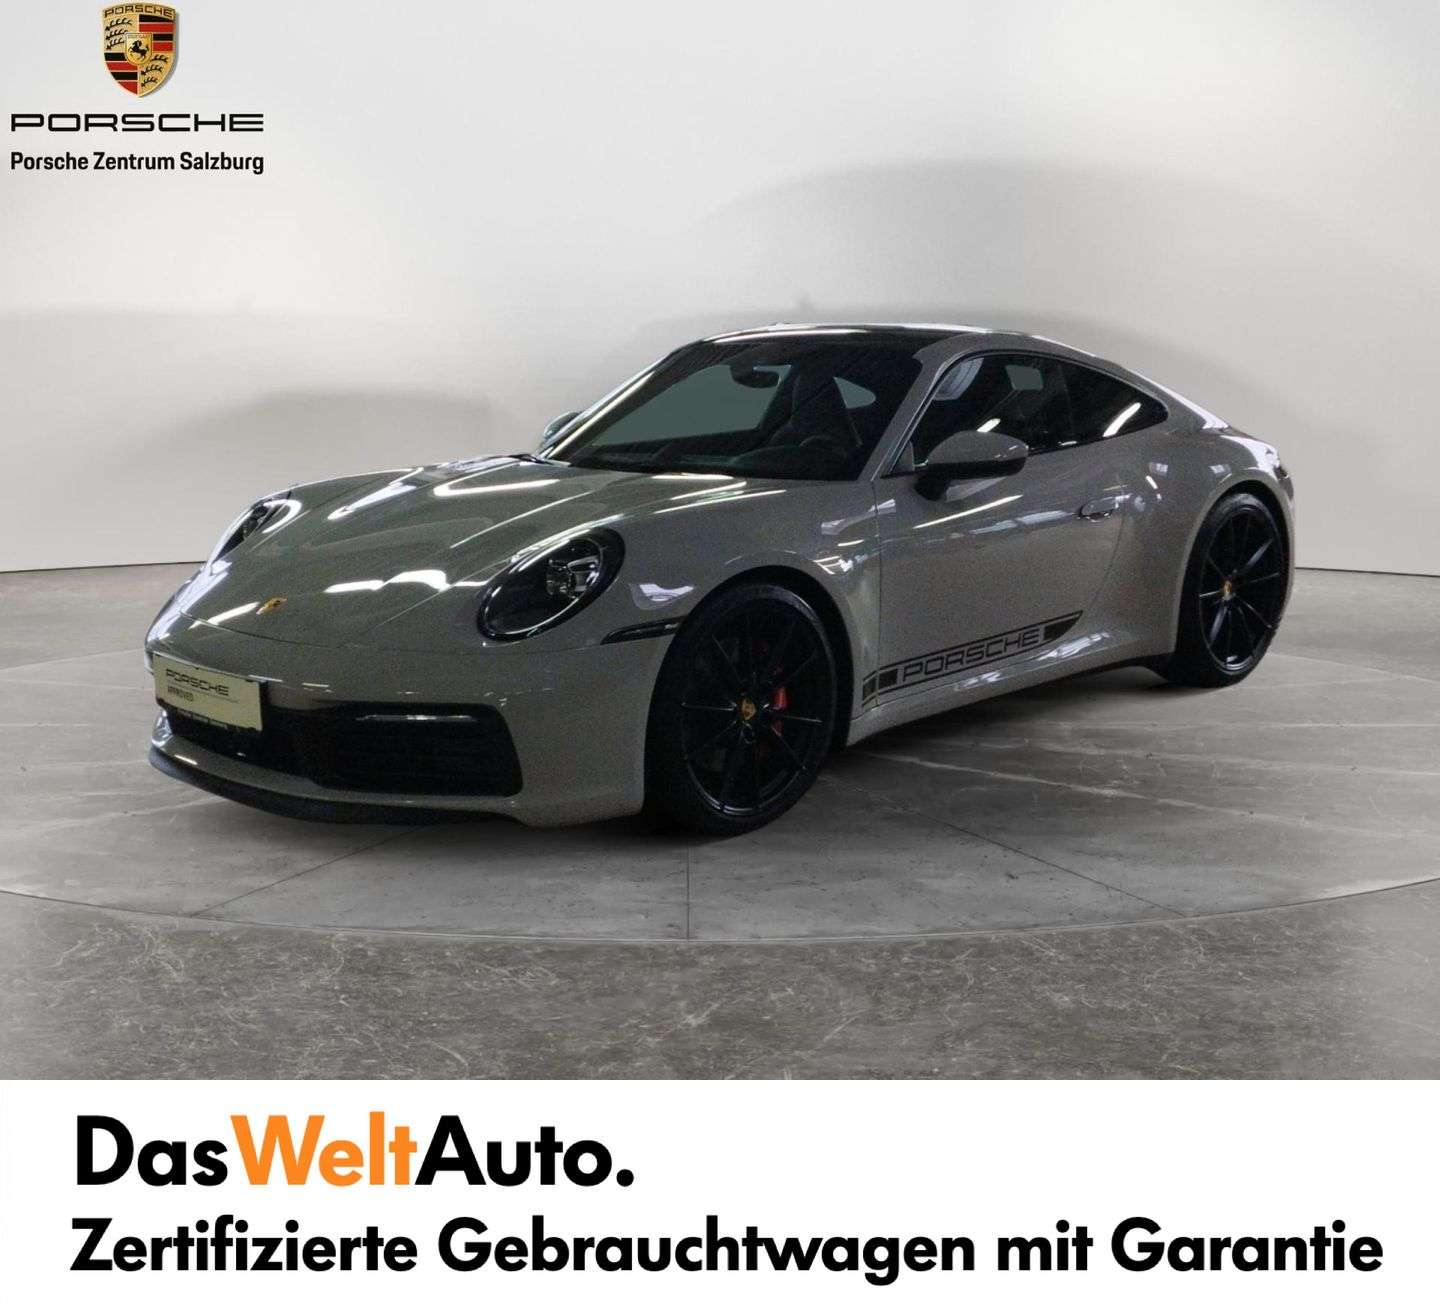 Porsche 911 Coupe in Grey used in Salzburg for € 193,900.-